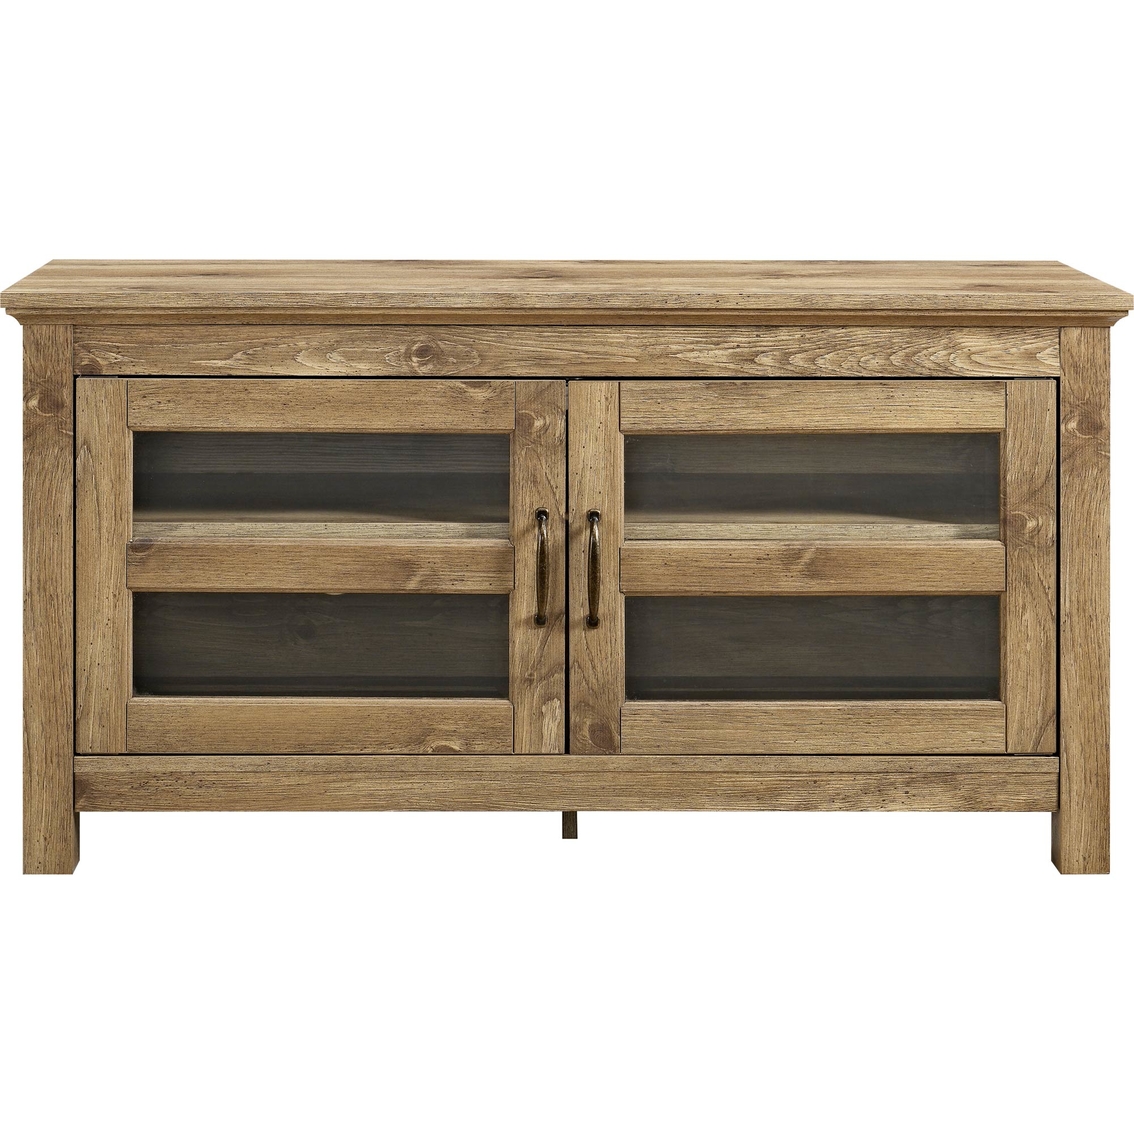 Walker Edison 44 in. Wood TV Stand with Glass Doors - Image 2 of 4